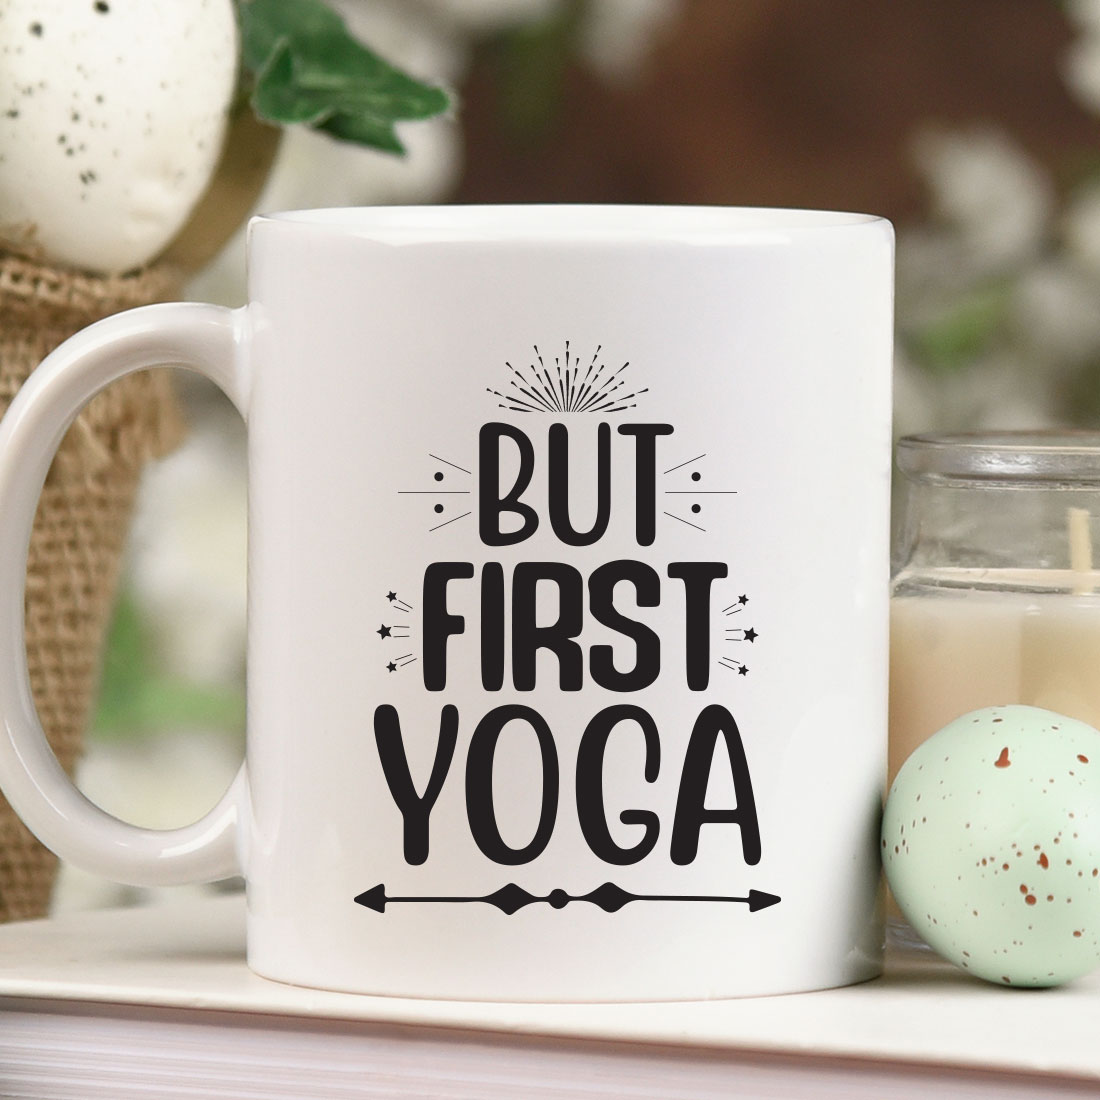 Coffee mug that says but first yoga next to a candle.